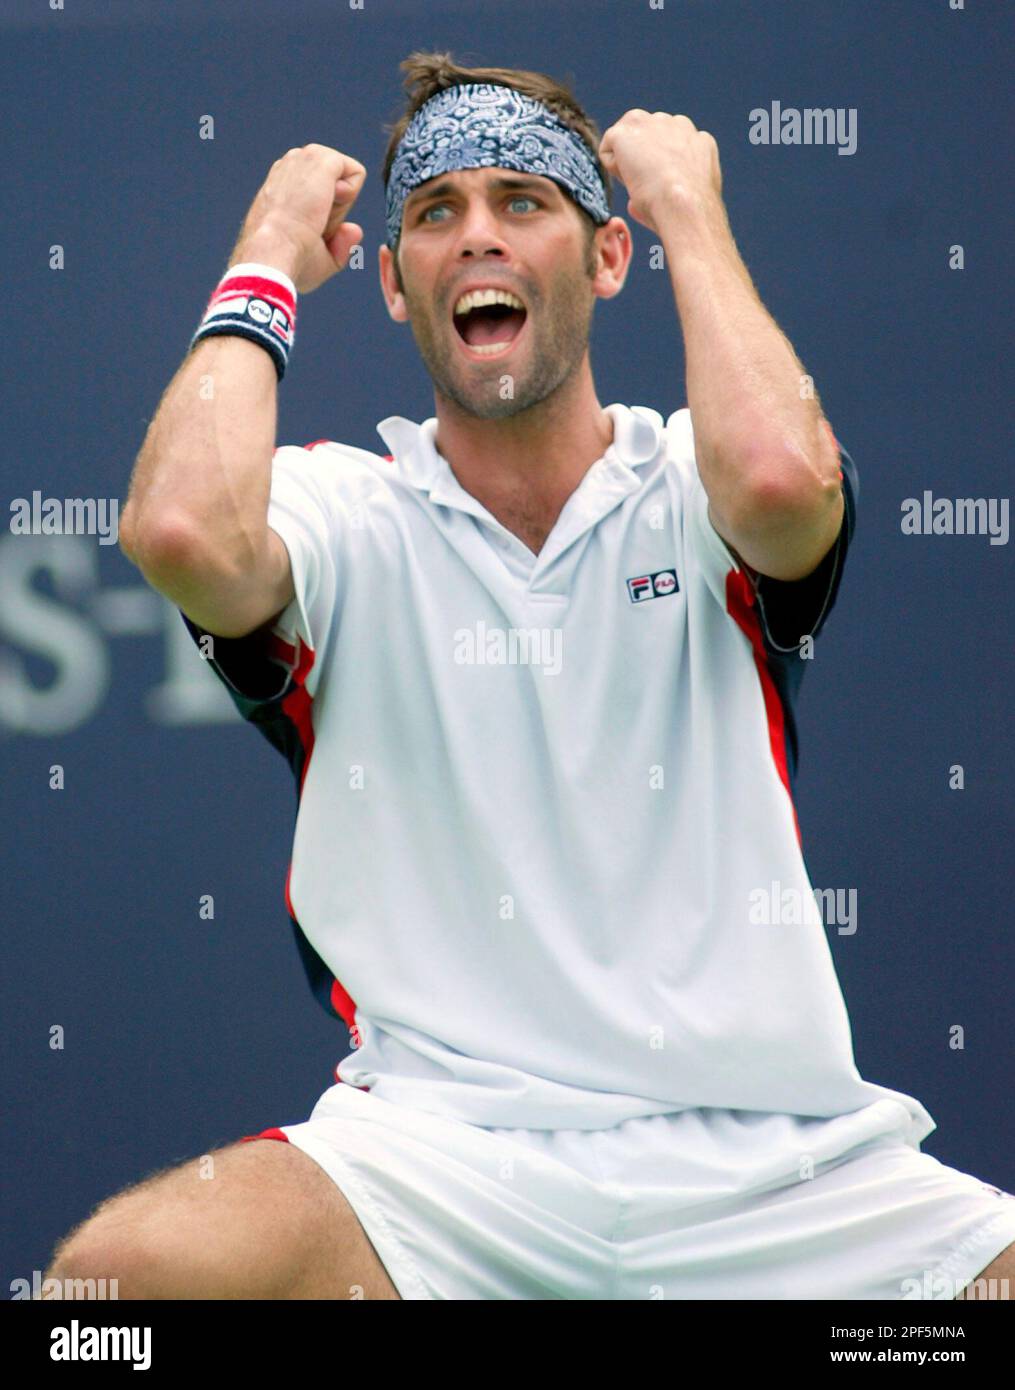 Simon Larose from Canada, celebrates his 7-6 (5), 1-6, 7-5 victory over  Jose Acasuso of Argentina at the Tennis Masters Canada Series Wednesday,  August 6, 2003 in Montreal. (AP PHOTO/Paul Chiasson Stock Photo - Alamy